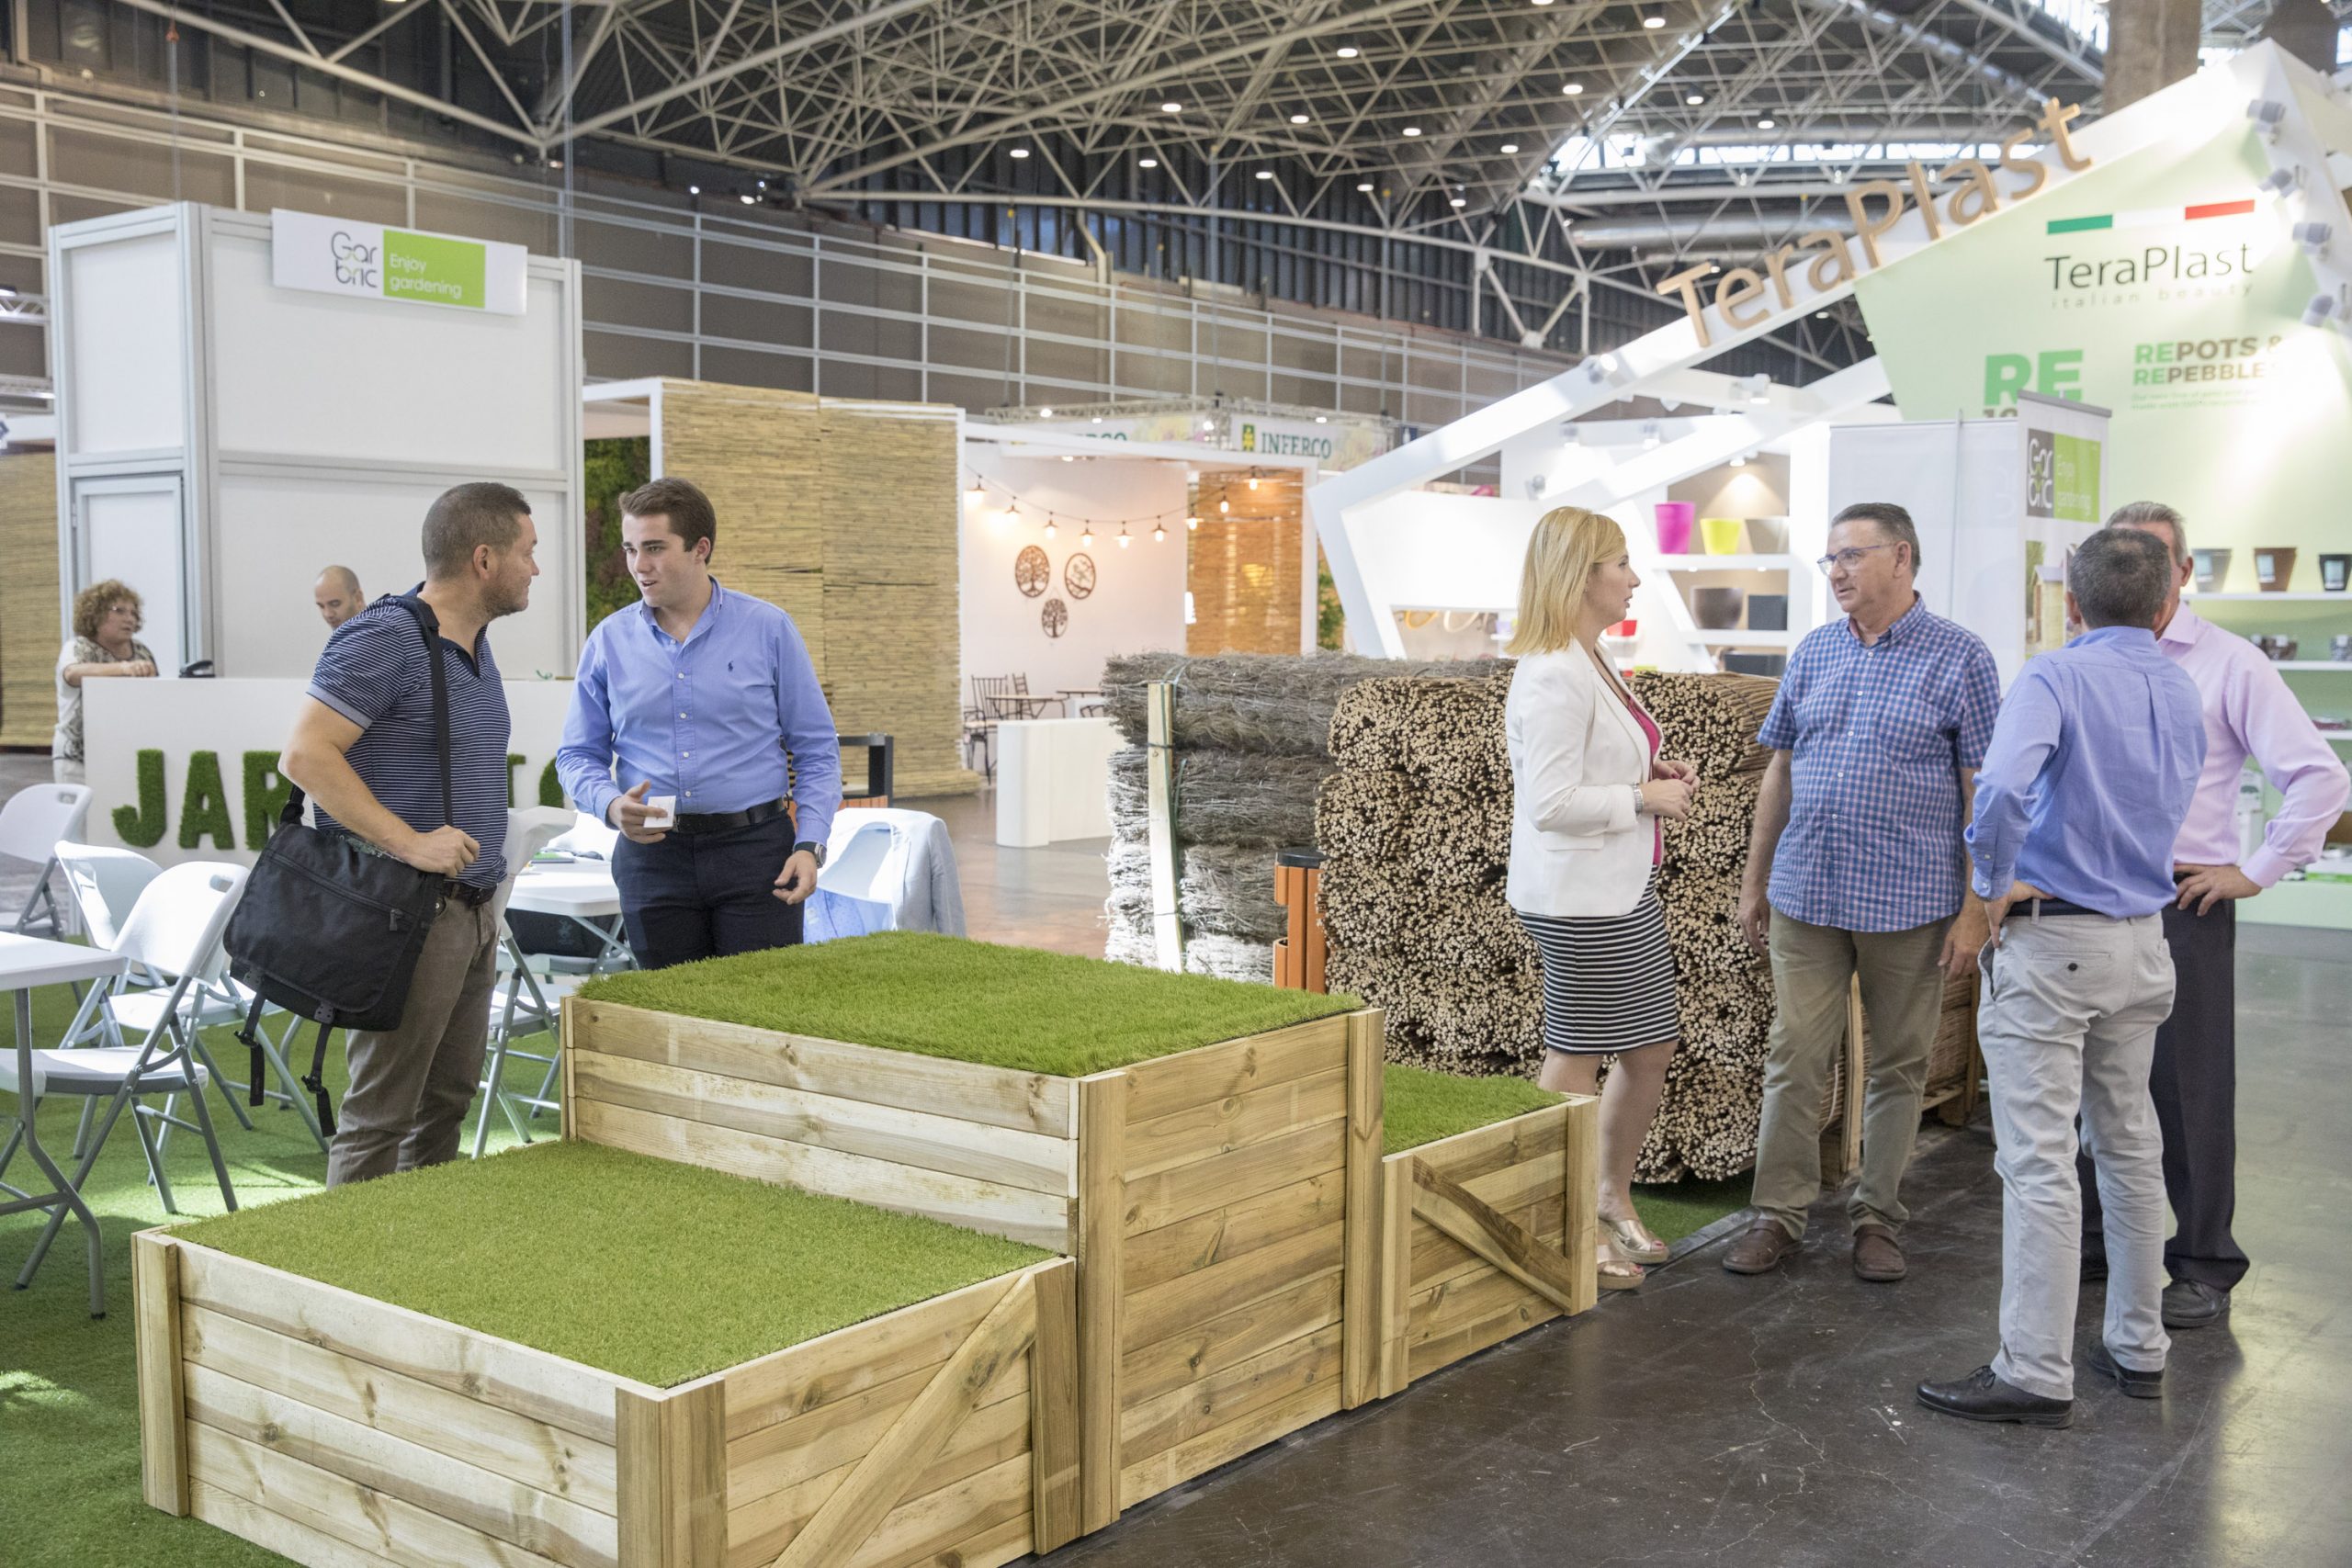 The gardening and hardware and DIY sector aim for a strong and professional fair to relaunch its economy